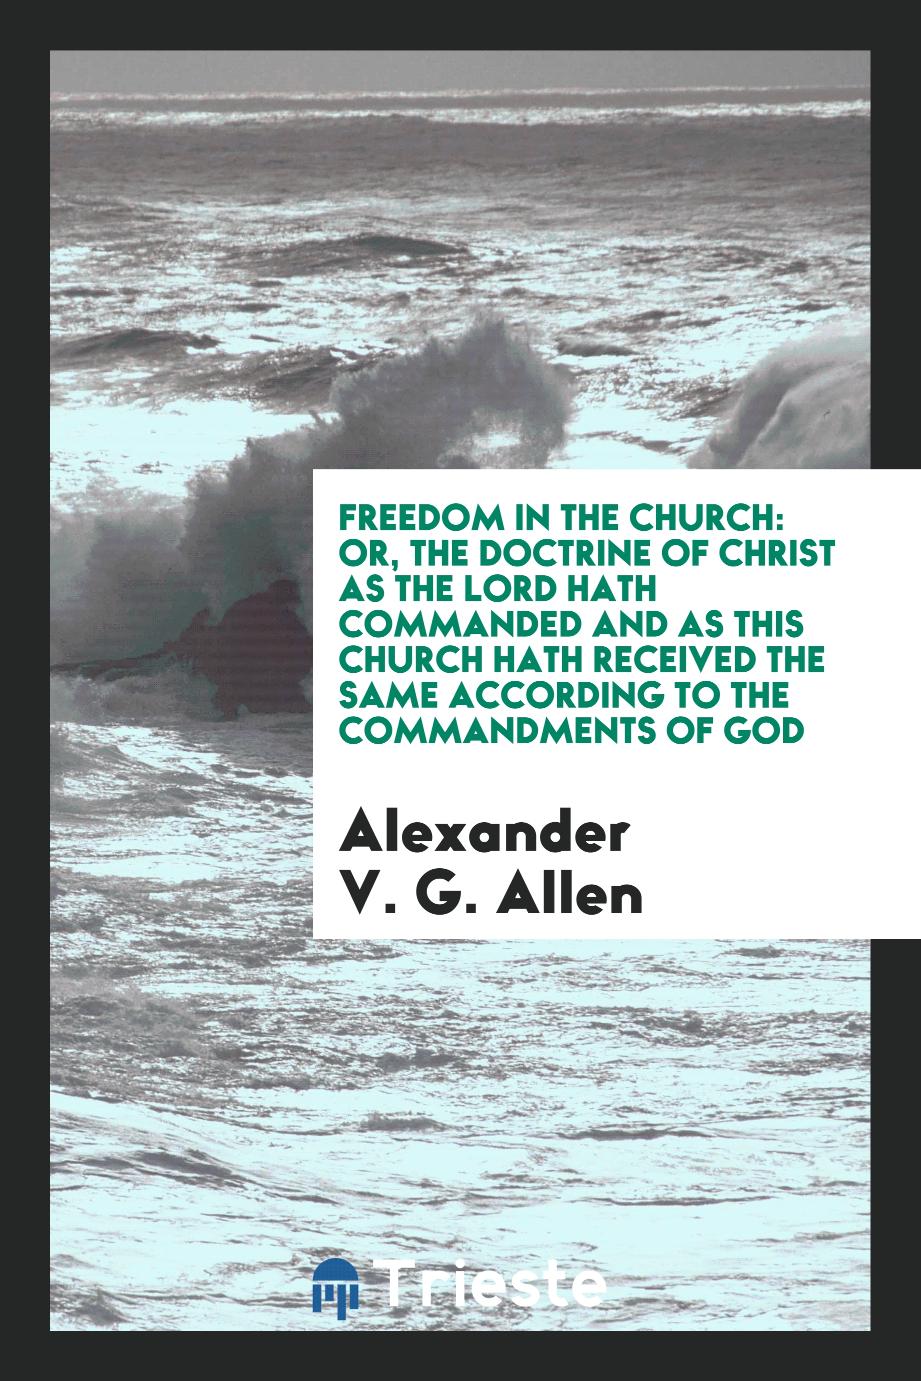 Freedom in the church: or, the Doctrine of Christ as the Lord hath commanded and as this church hath received the same according to the commandments of God